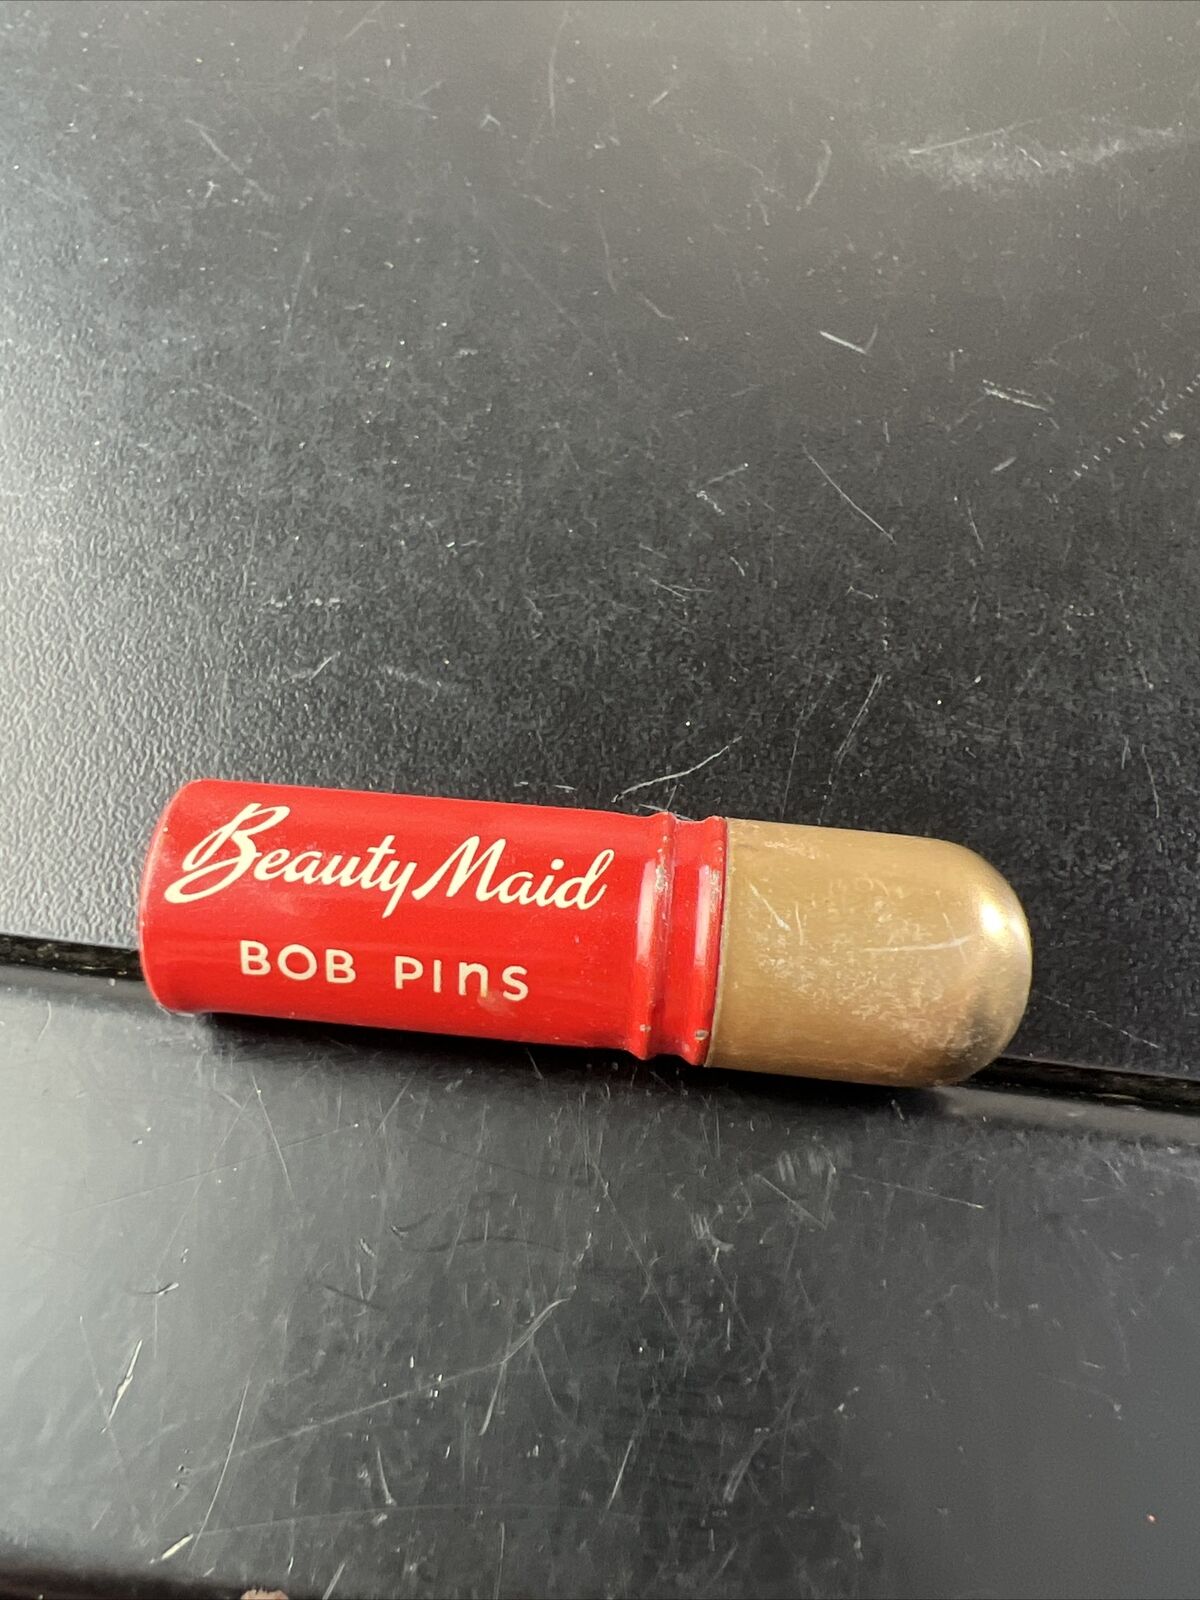 1950s VINTAGE BEAUTY MAID RED METAL BULLET BOB HAIR PIN HOLDER WITH BOBBY PINS